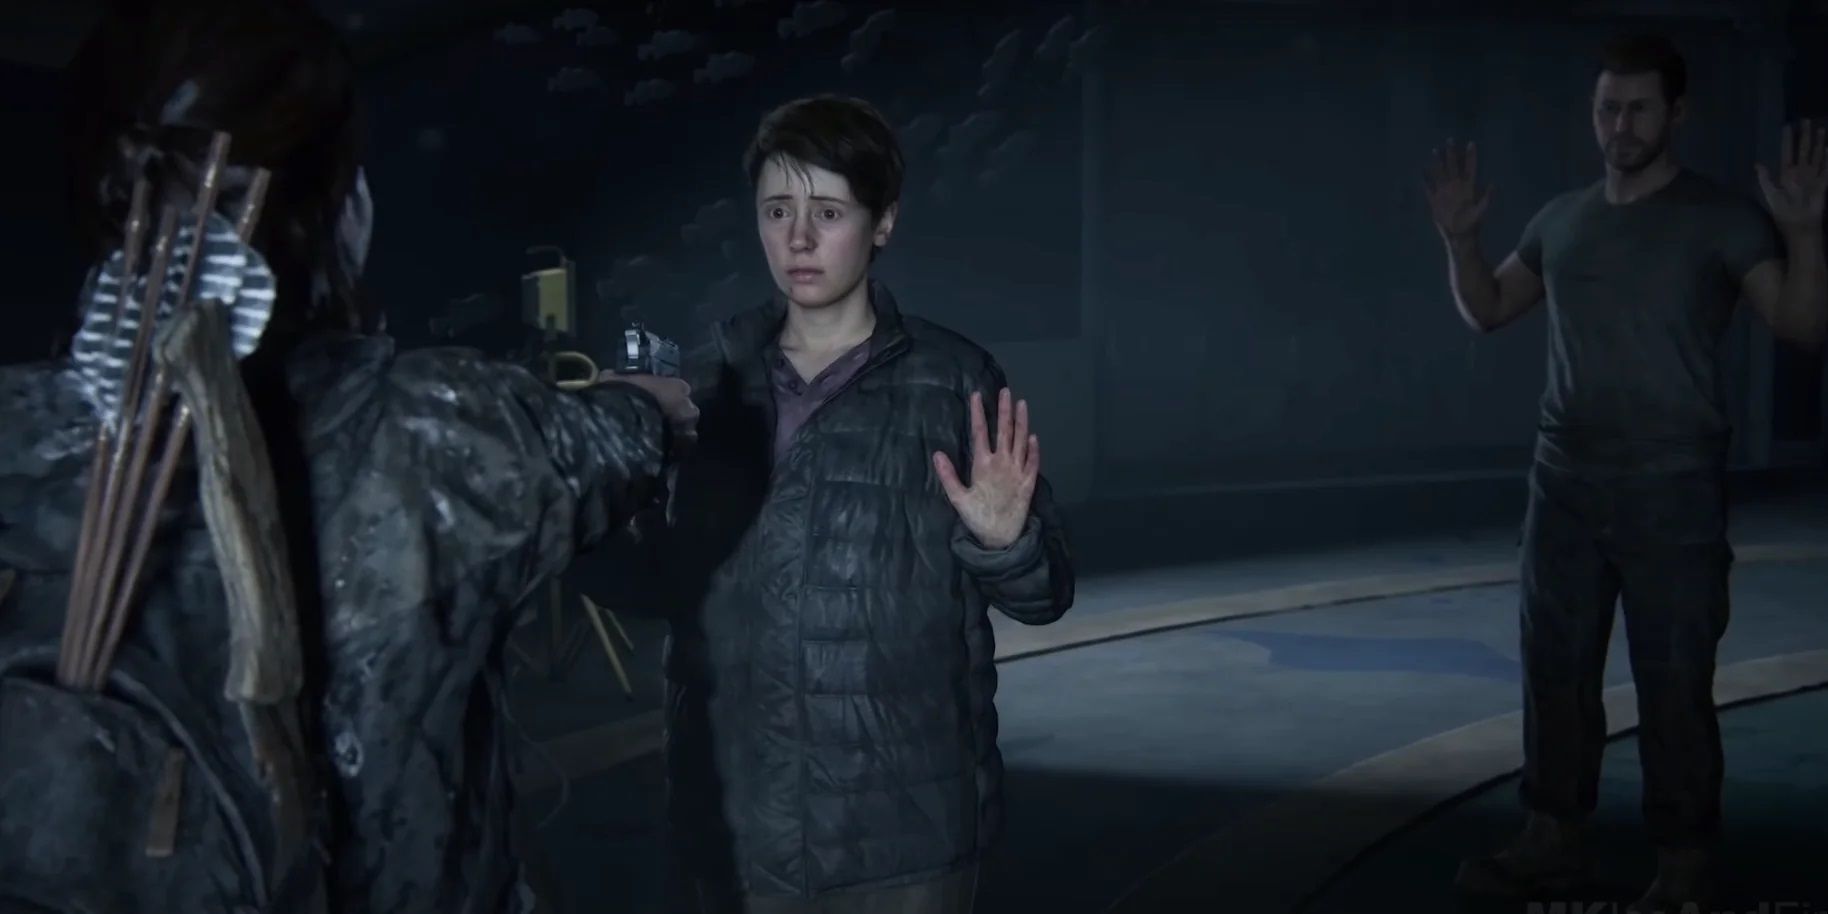 Owen and Mel with their hands up in The Last of Us Part II